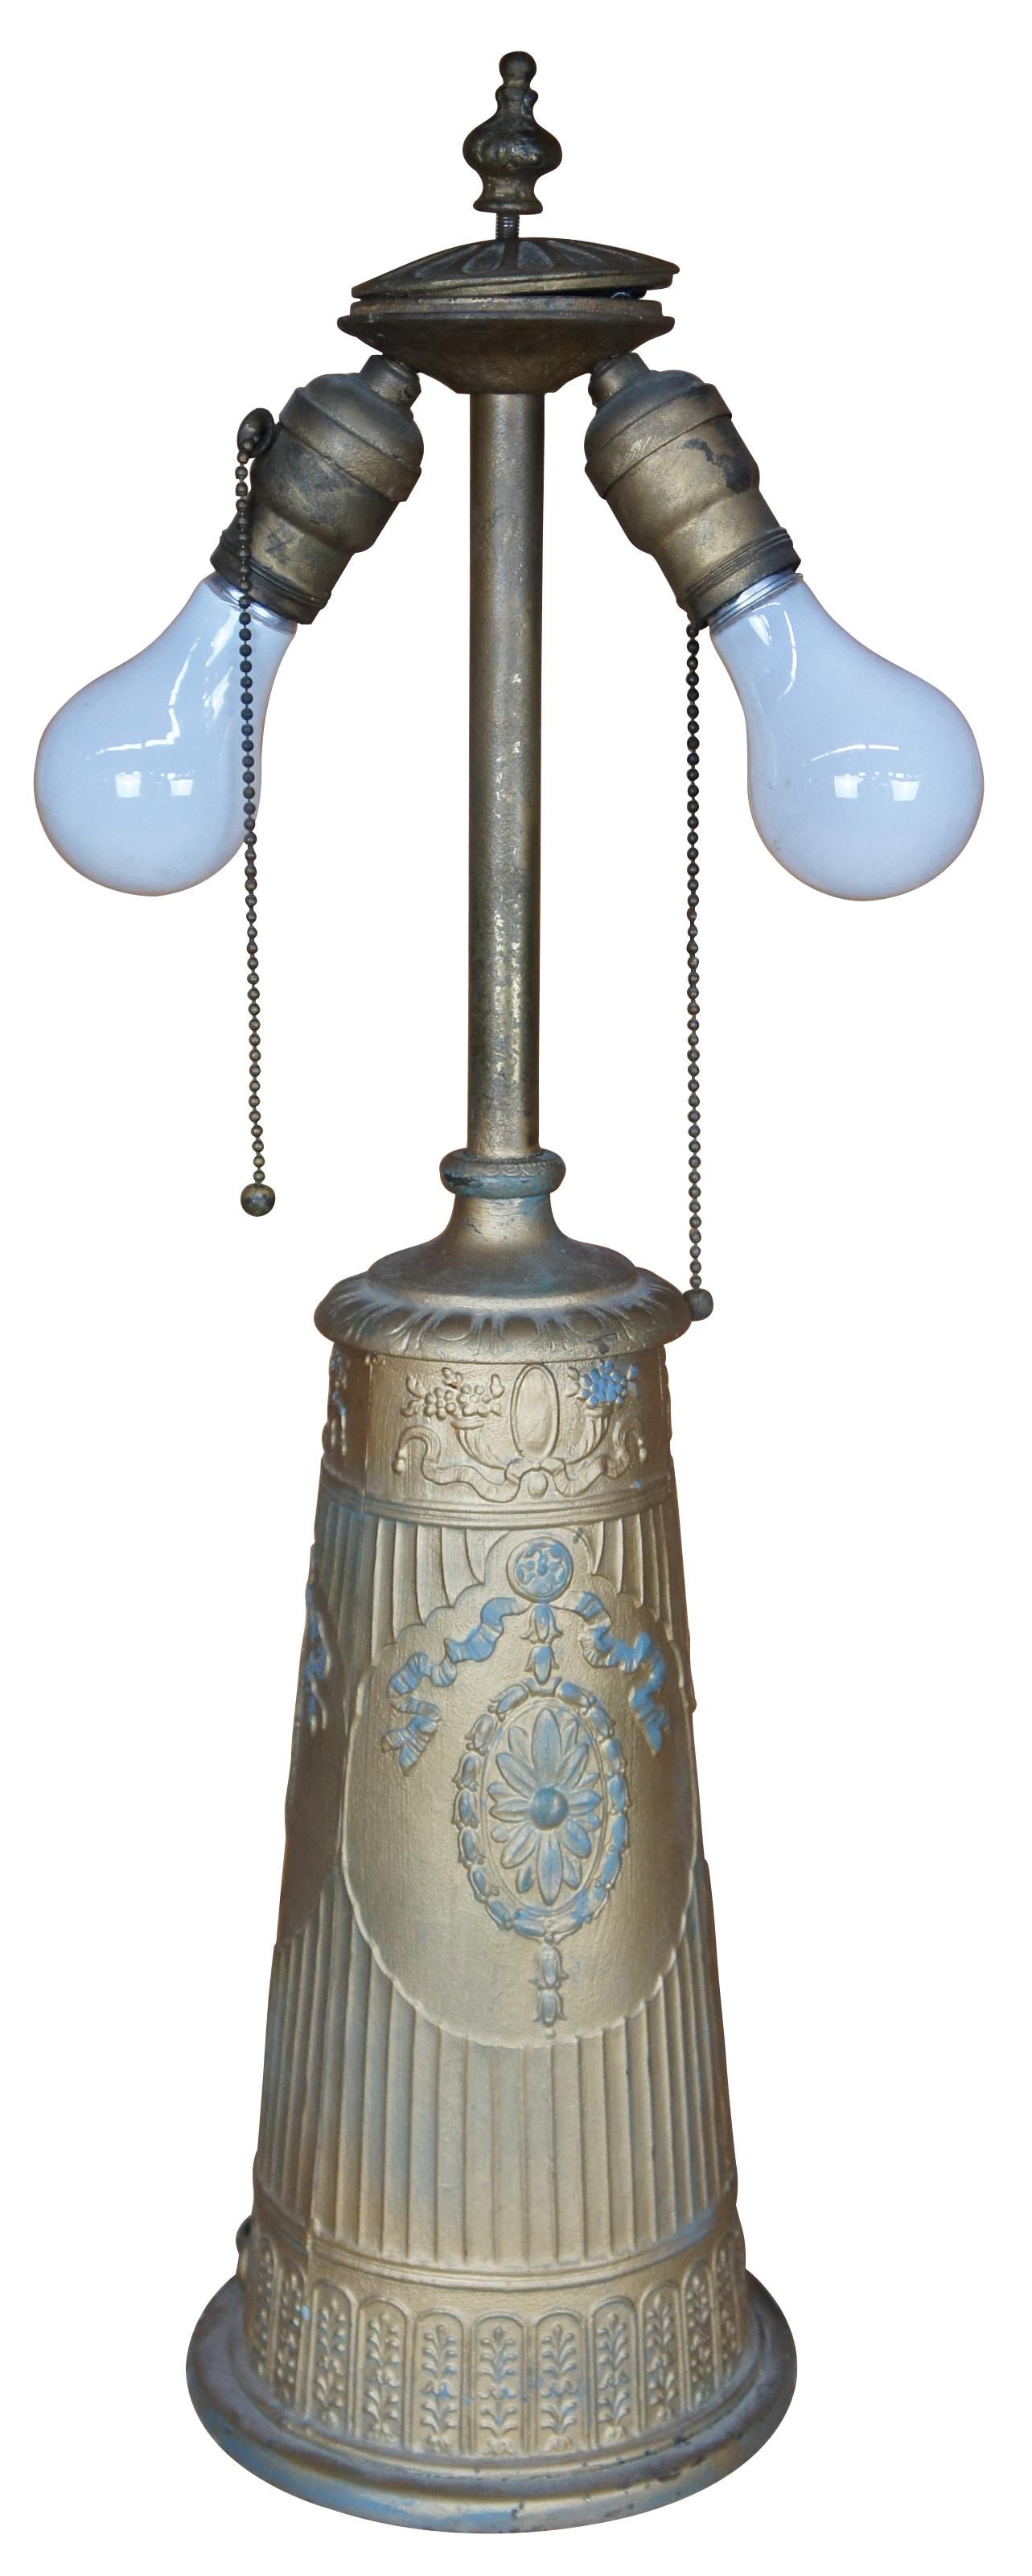 Monumental antique Art Nouveau slag glass lamp featuring Neoclassical styling with reticulated filigree shade. Measures: 25